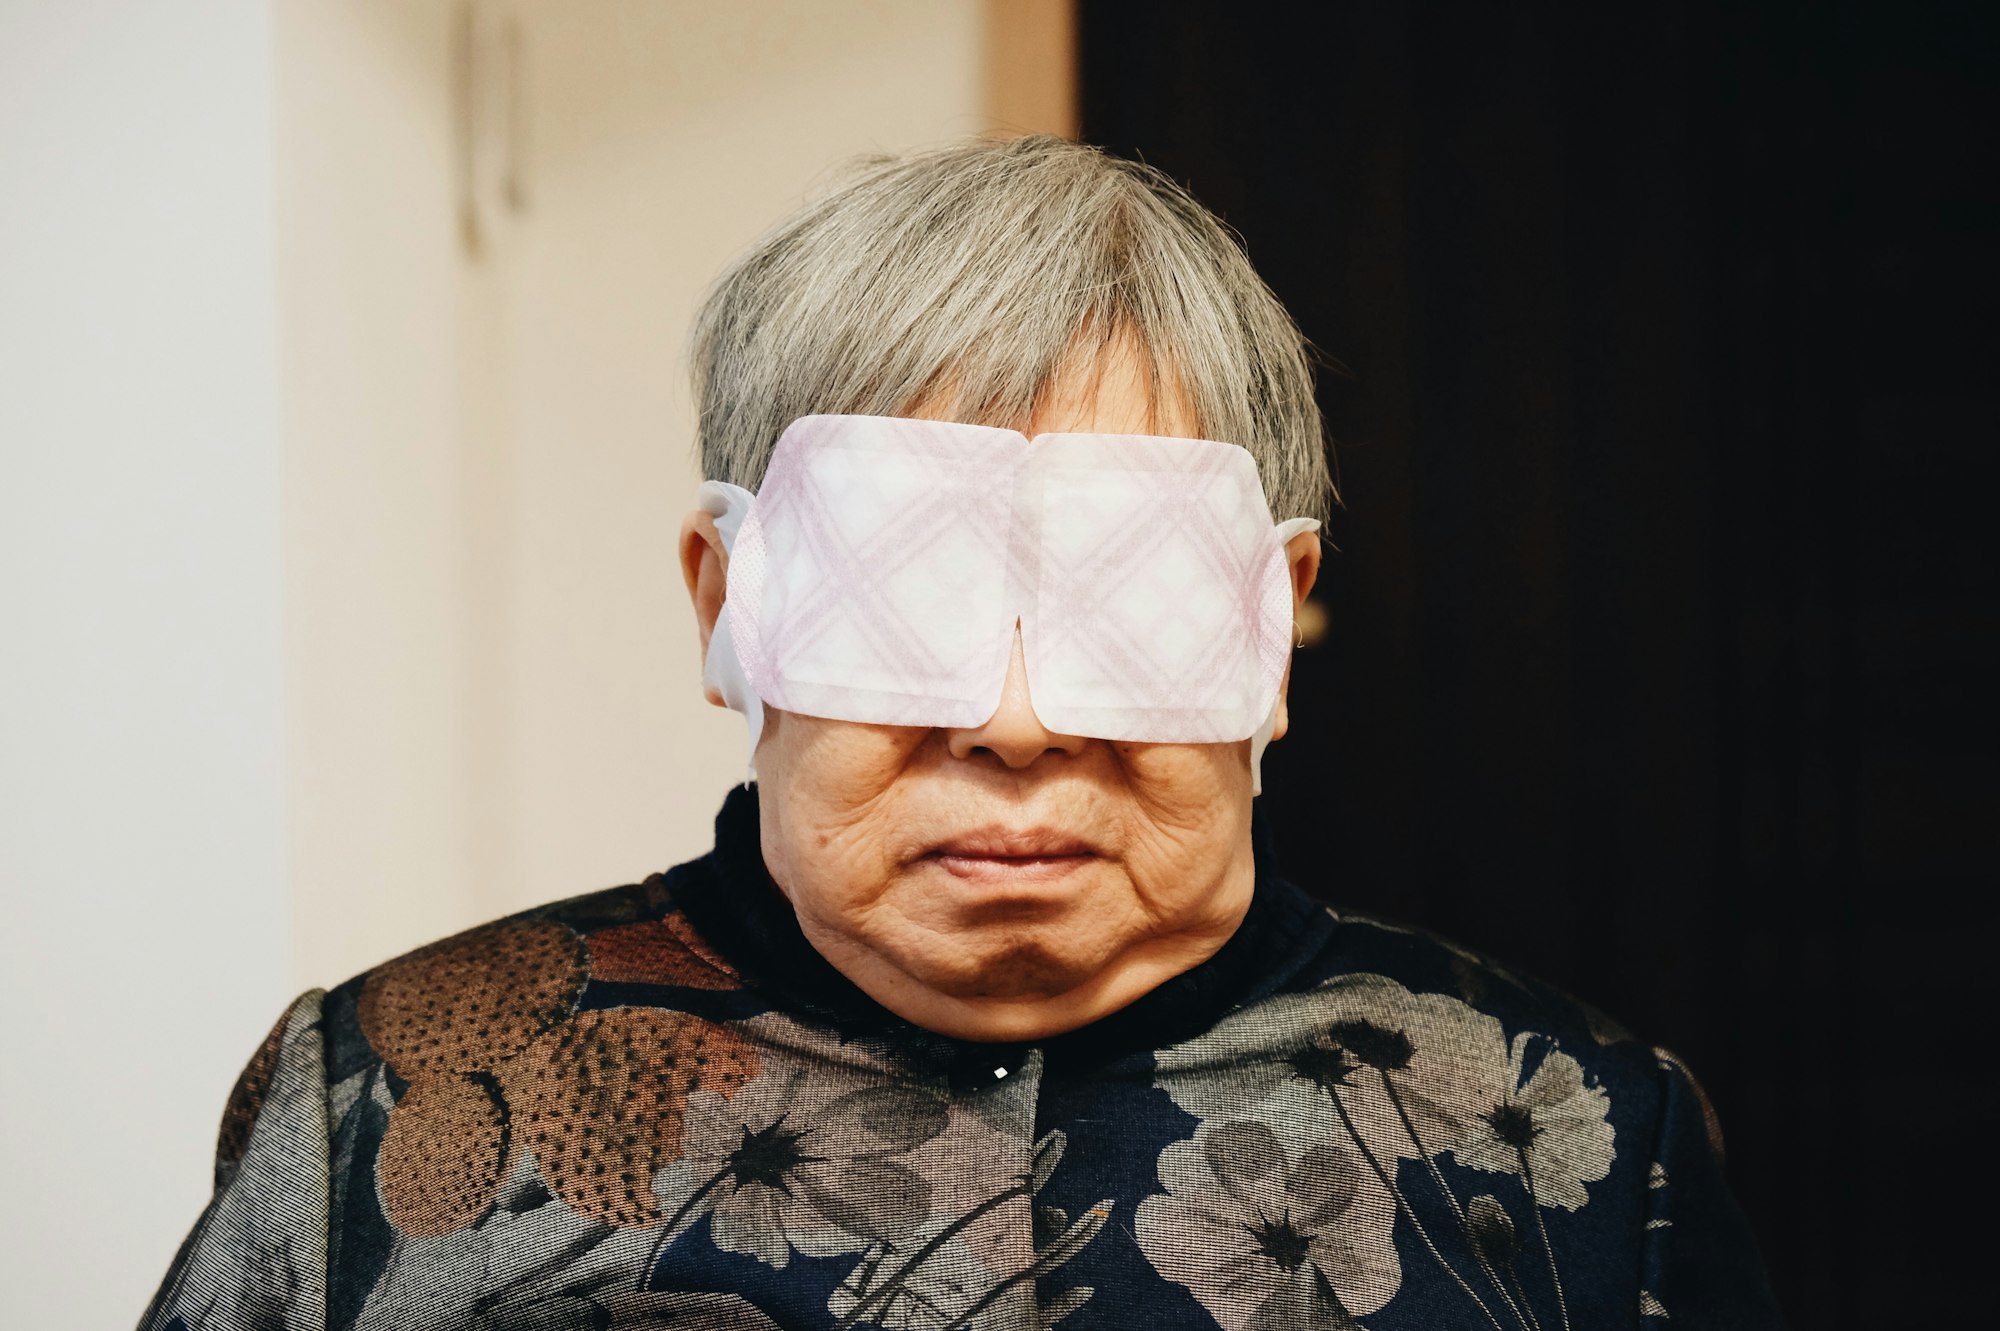 grandma come to my home and try a steam hot eye mask for the first time